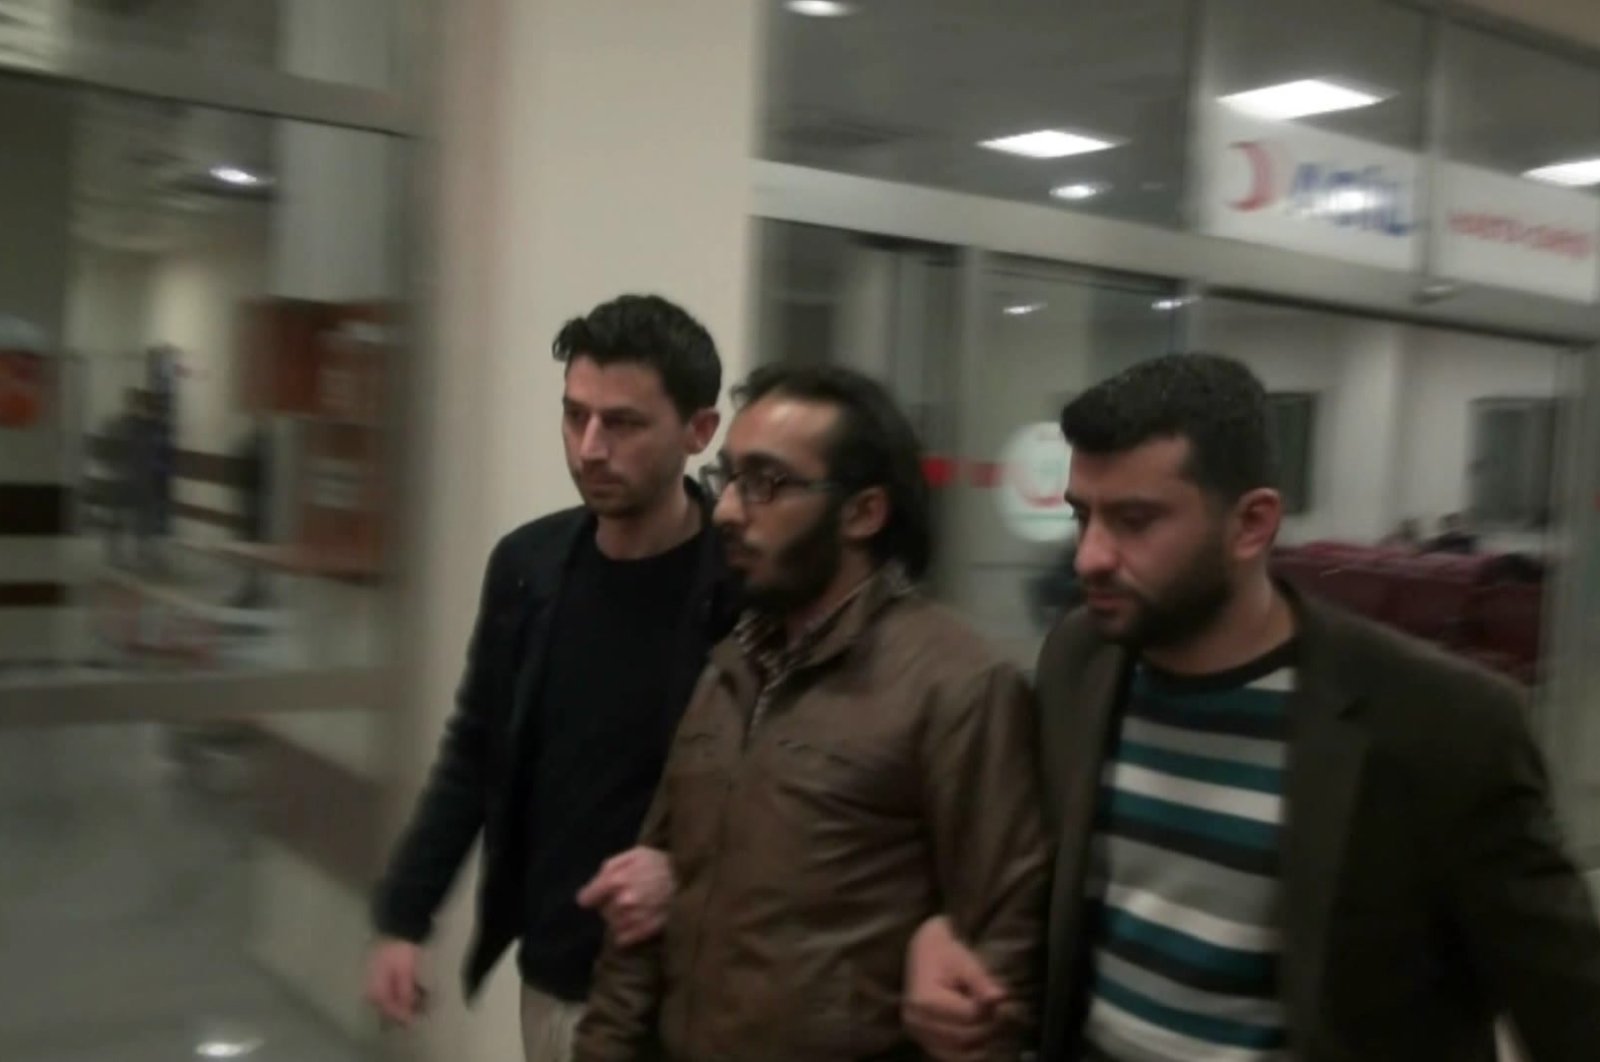 Security officers escort Mohammed al-Rasheed after his detention in Şanlıurfa, March 15, 2015. (A HABER PHOTO)